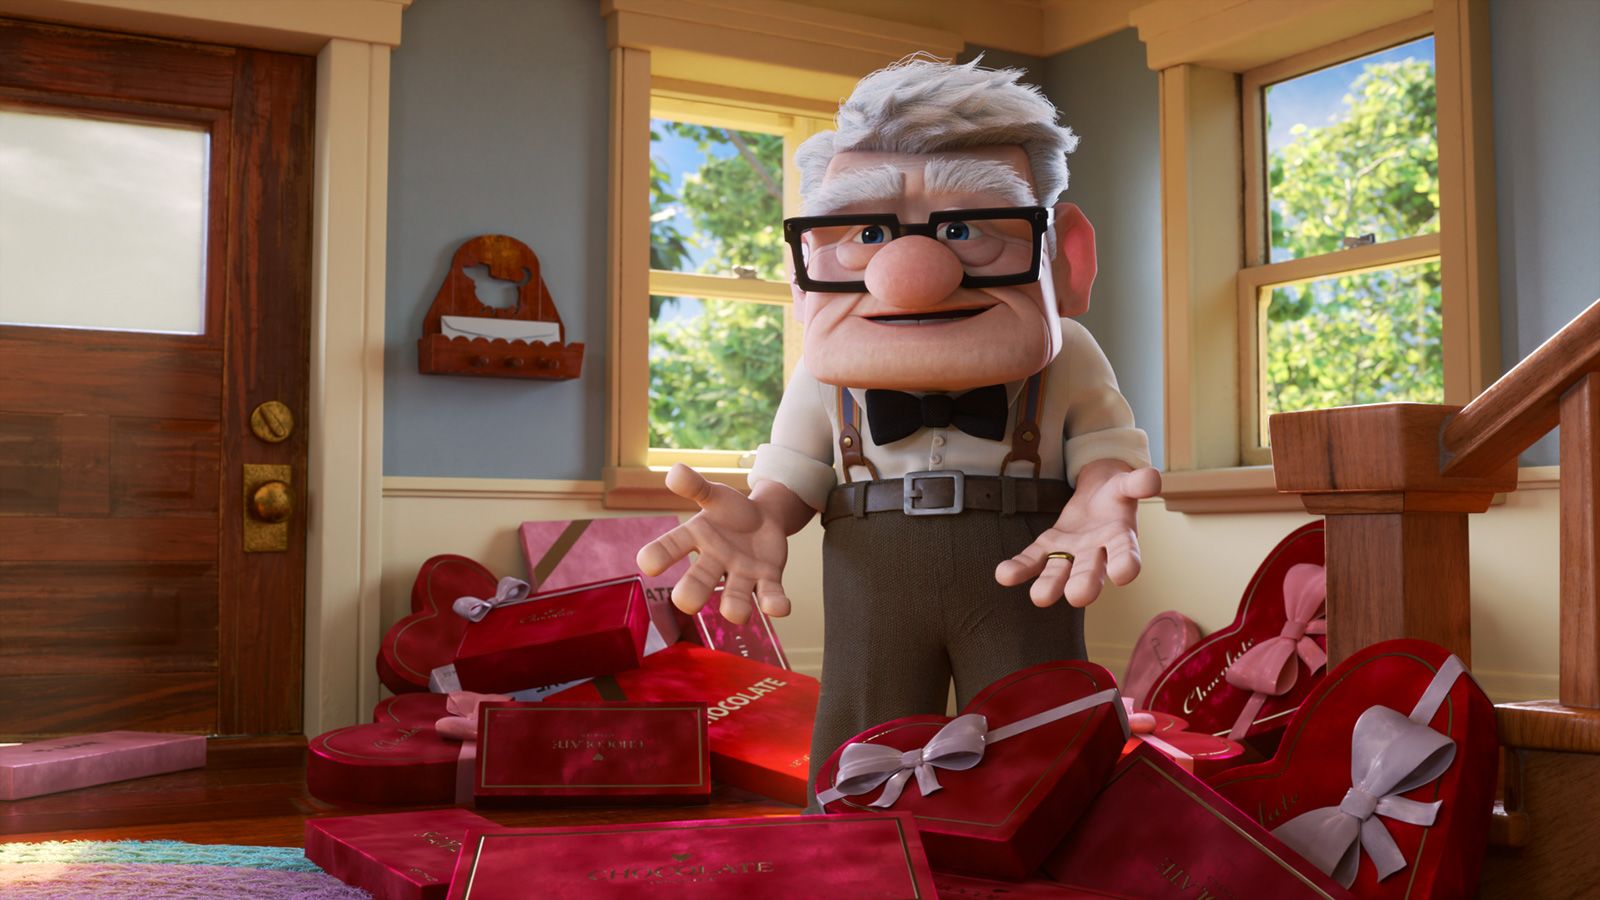 Carl Fredricksen Takes Another Journey in "Carl's Date" Trailer